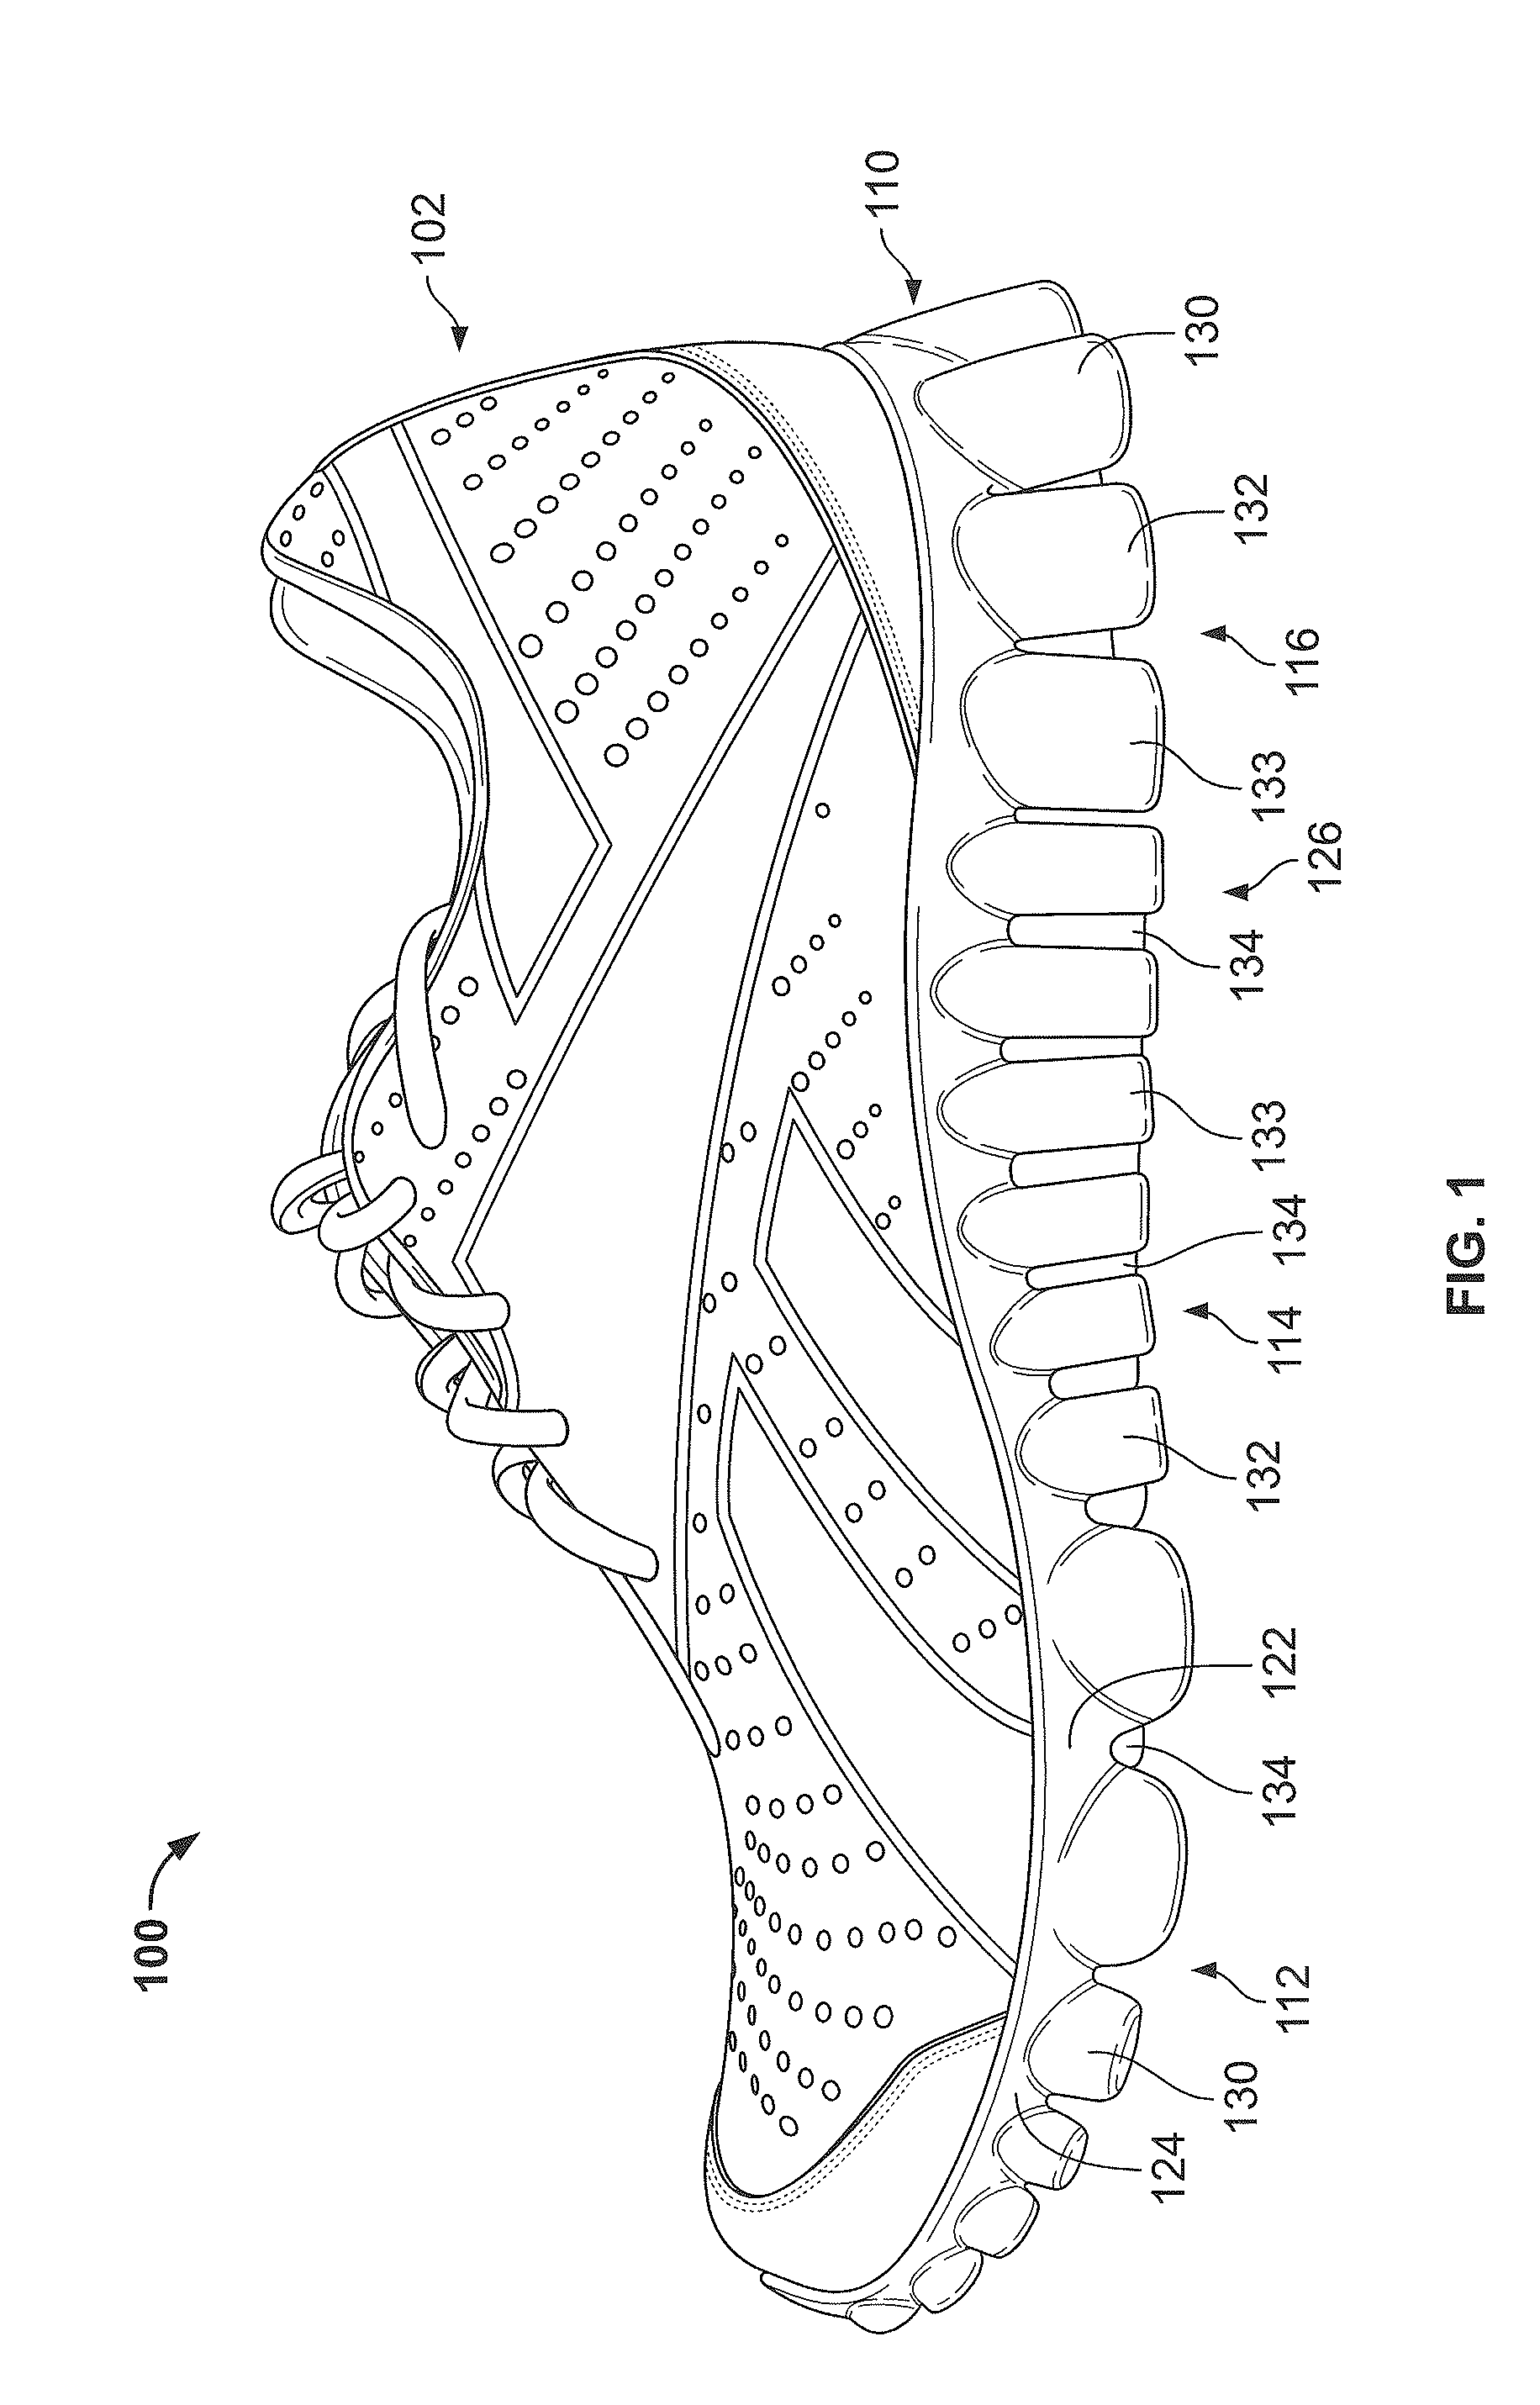 Sole With Projections and Article of Footwear